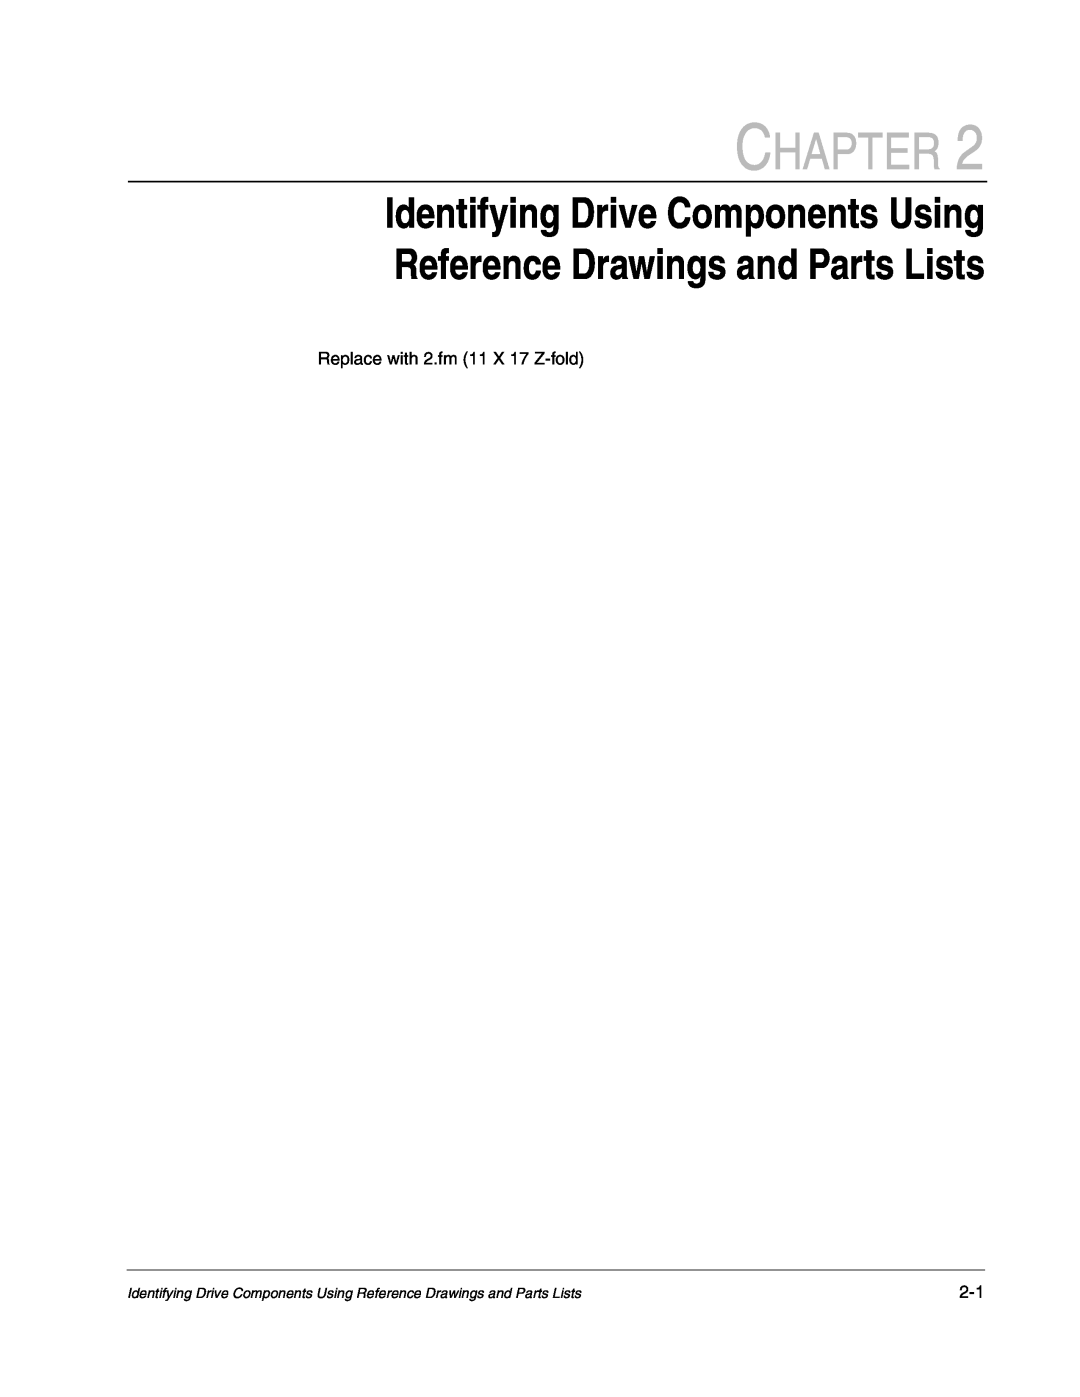 Carrier D2-3466-2 instruction manual Identifying Drive Components Using Reference Drawings and Parts Lists, Chapter 